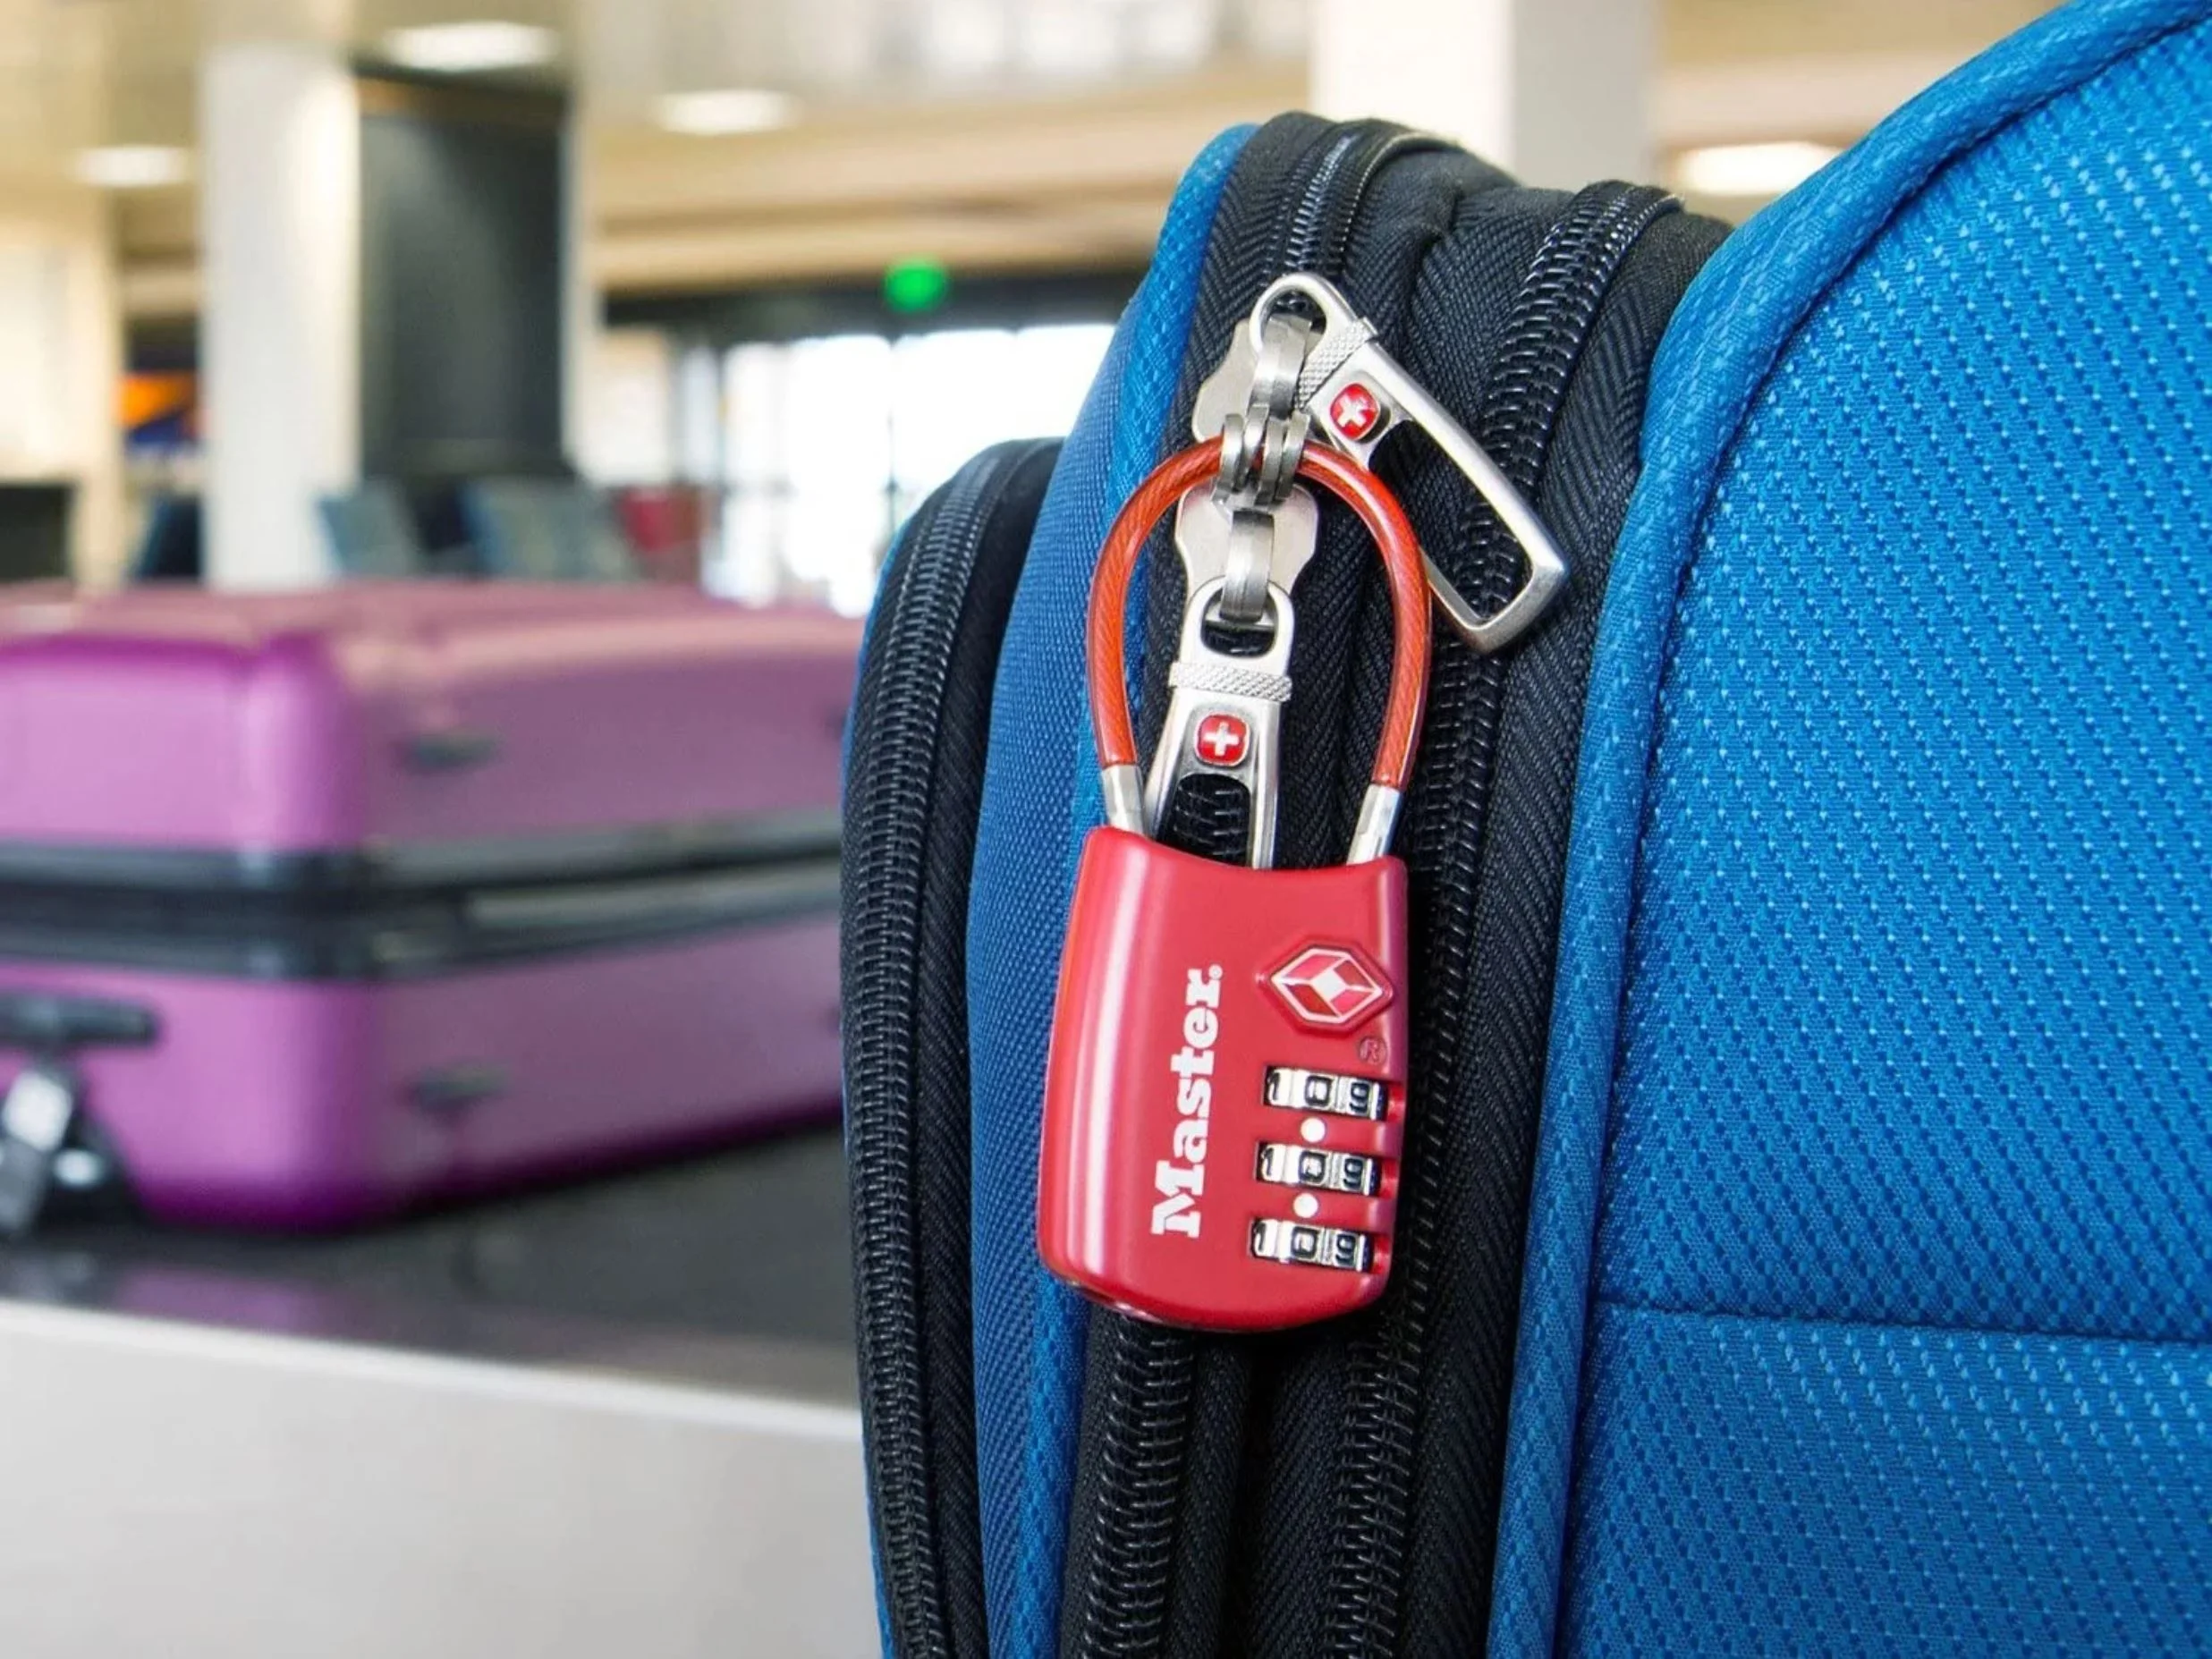 The Legal Regulations Regarding The Use Of 3-Digit Combination Locks On Luggage